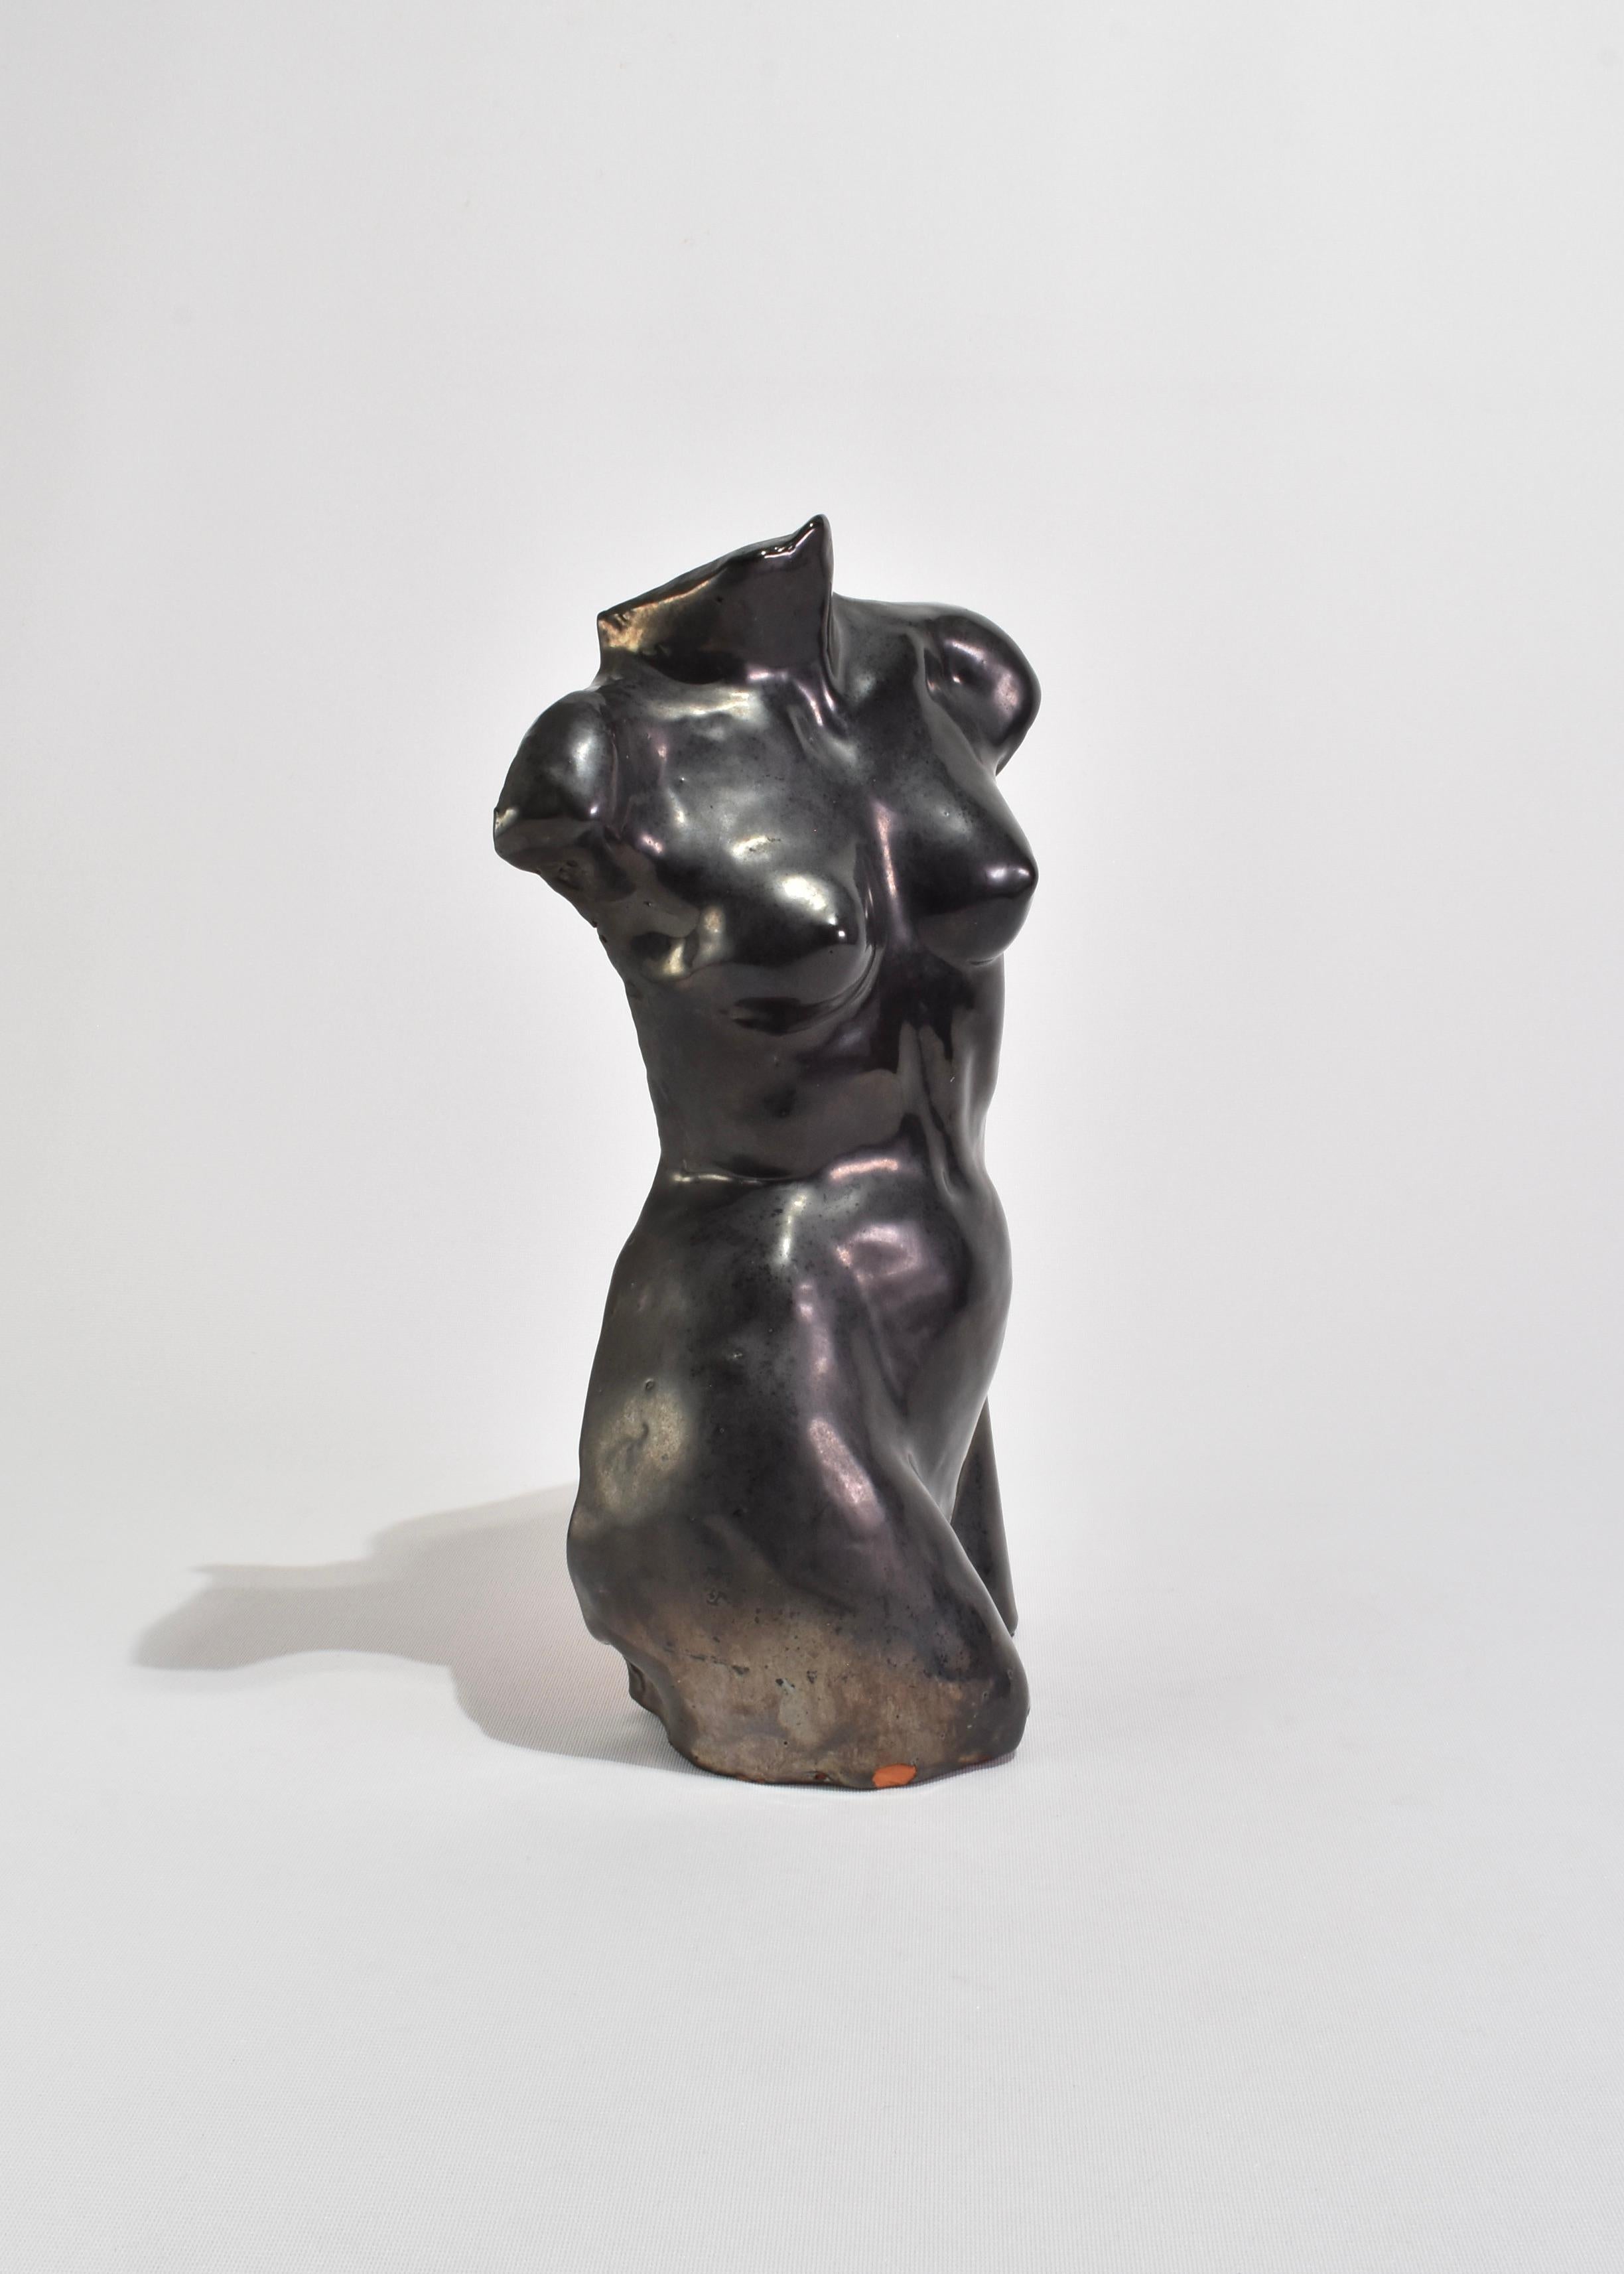 Stunning vintage handmade terracotta torso sculpture in a glossy charcoal glaze, signed on interior.